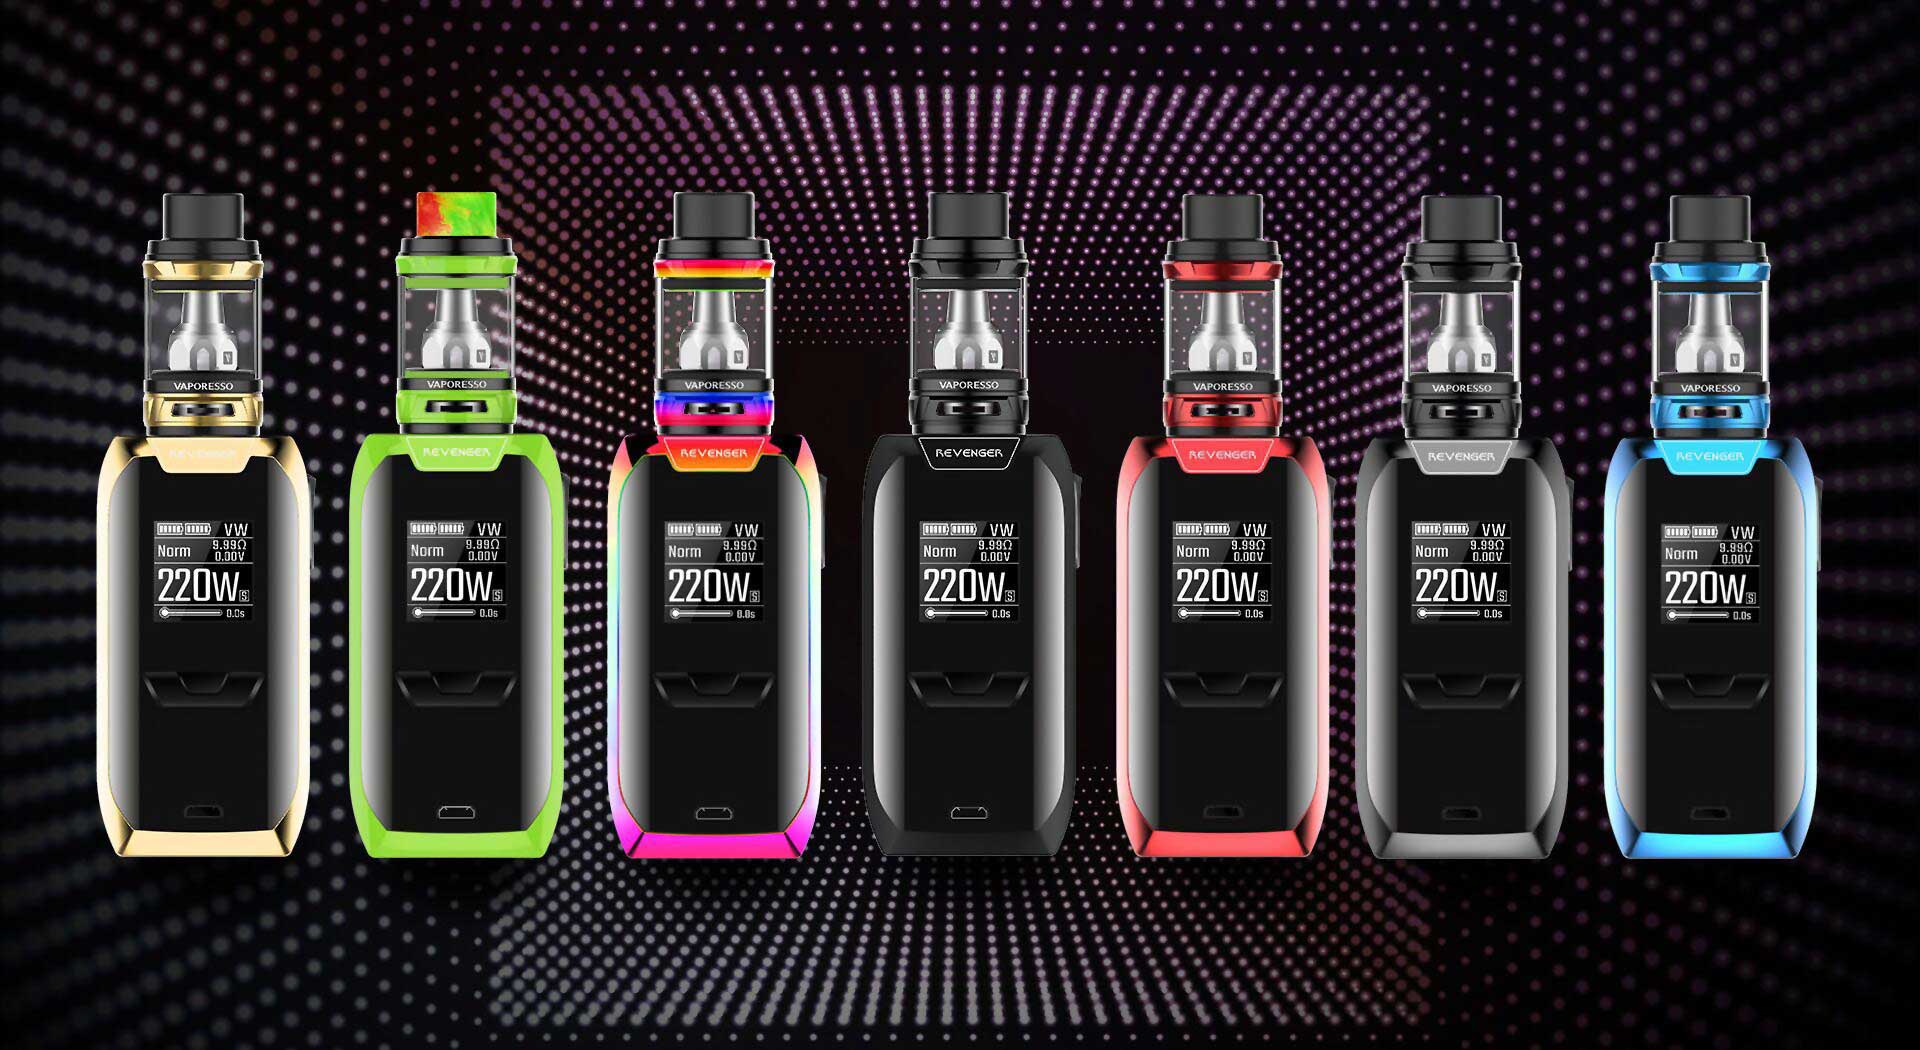 The Revenger by Vaporesso utilizes an advanced chipset OMNI Board 2.0 up to 220W vaping.